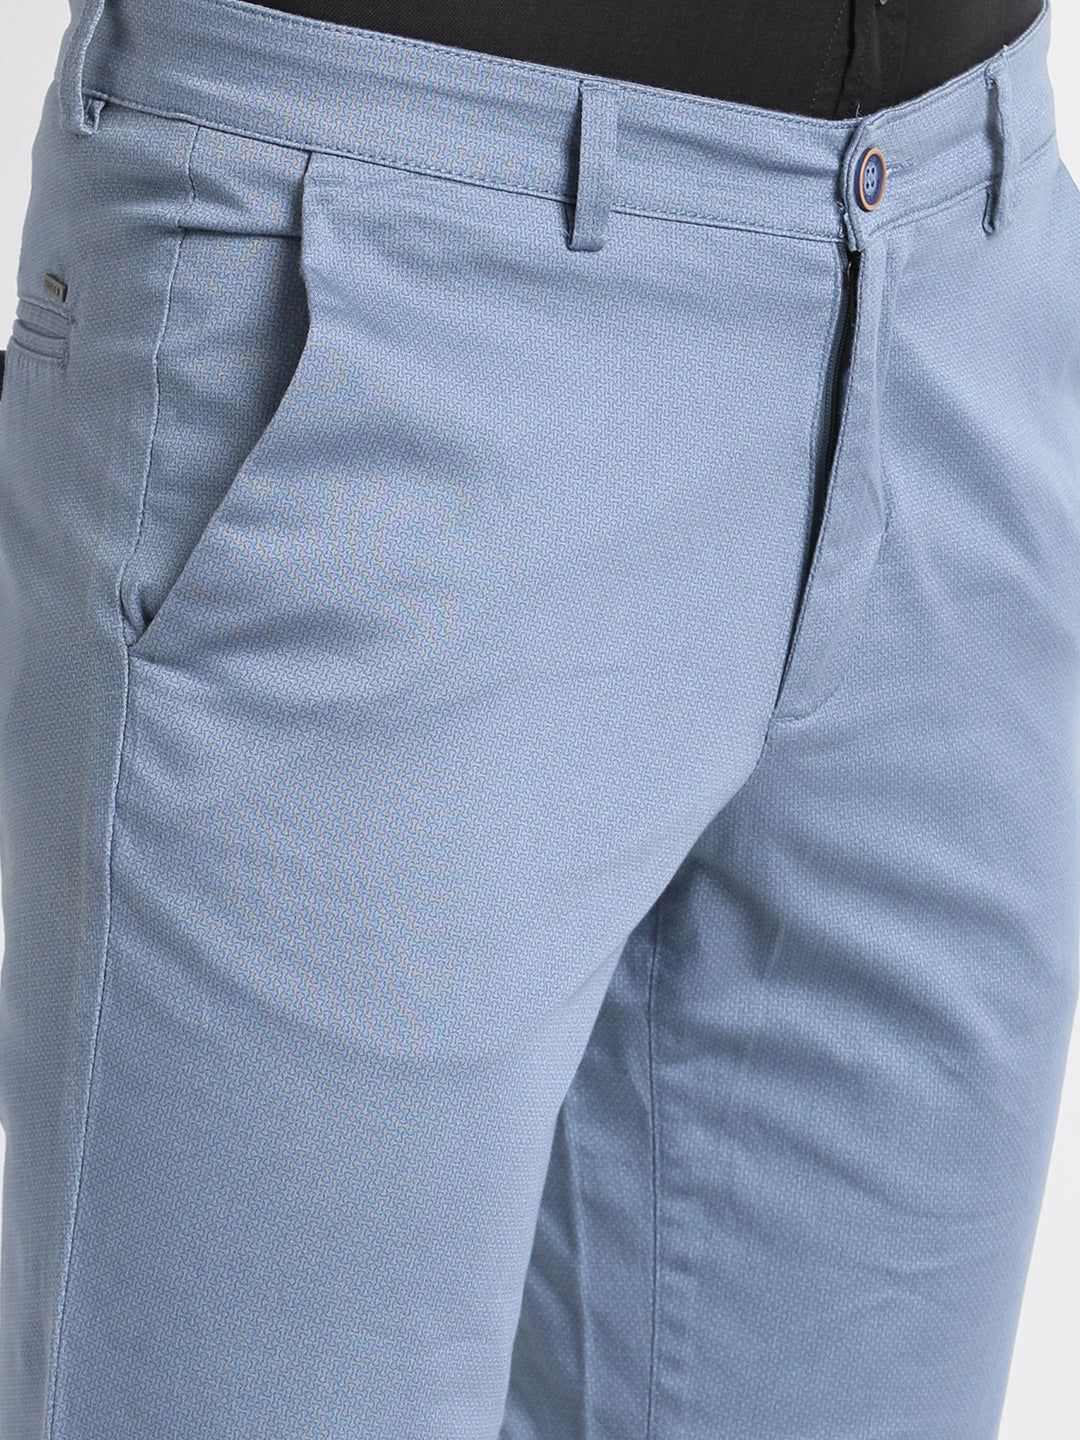 Cotton Stretch Light Blue Printed Narrow Fit Flat Front Casual Trouser